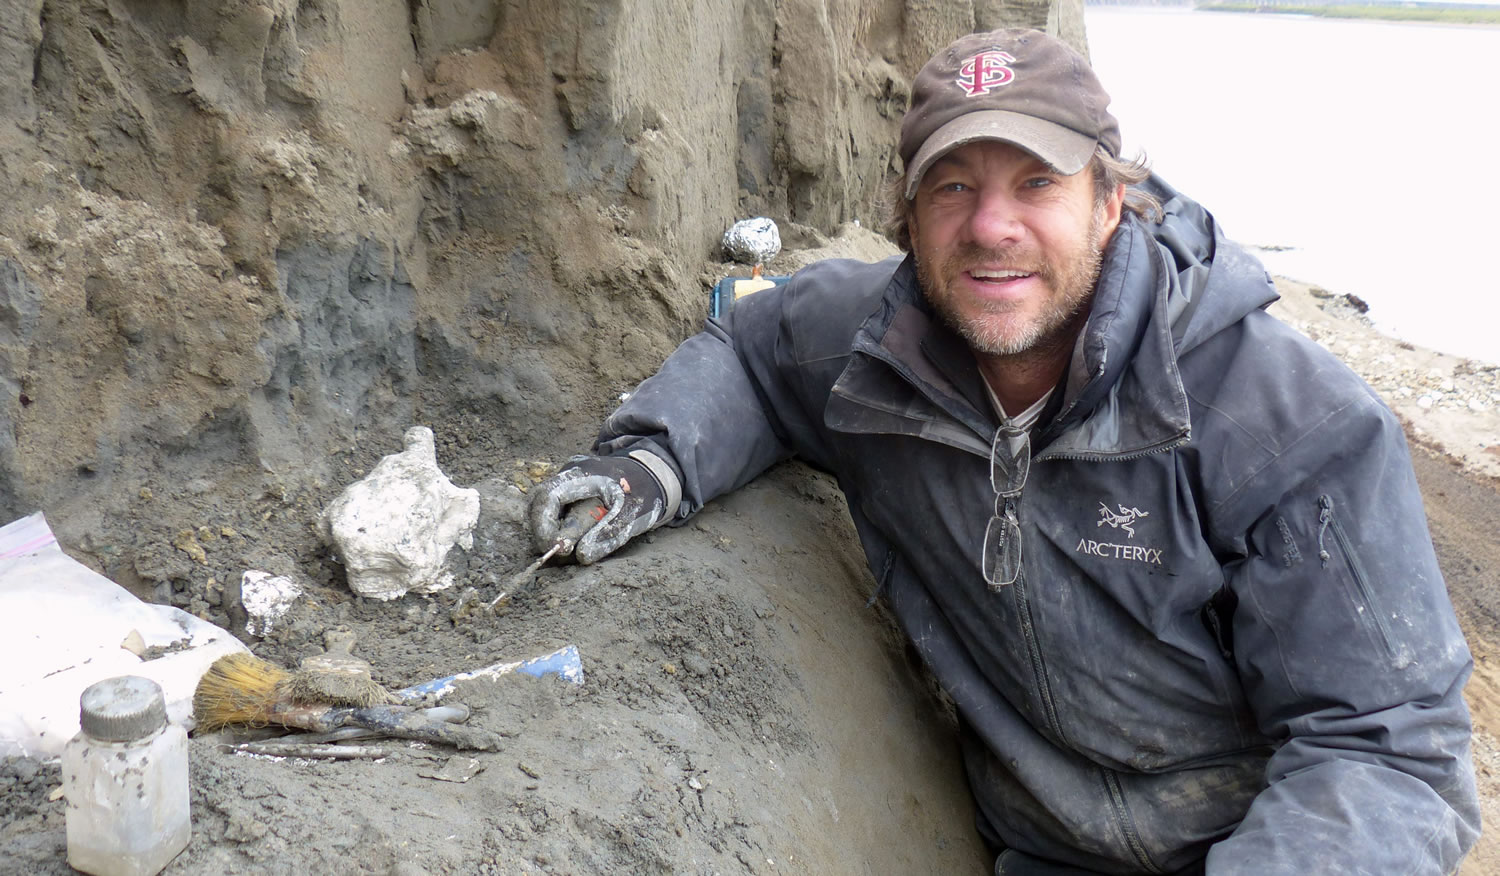 Researcher Greg Erickson works in a spot of the Liscomb Bed dig site near Nuiqsut, Alaska.